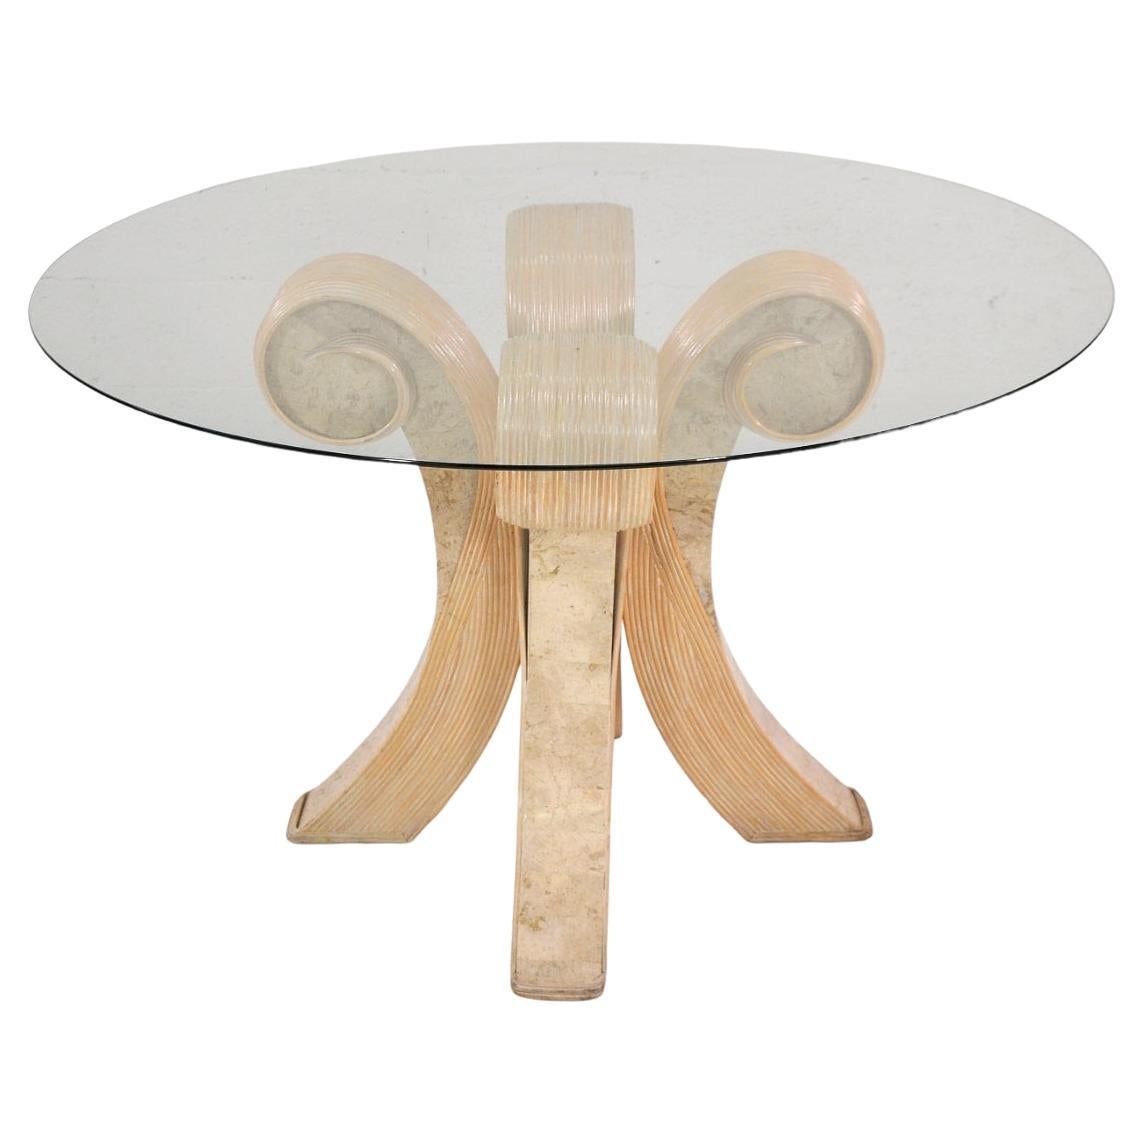 Vintage bentwood pencil reed and travertine dining table in the style of Betty Cobonpue, from the 1980s. The table features a round glass top and a pedestal base with wonderfully sculpted split reed foliate designs and tessellated beige Italian